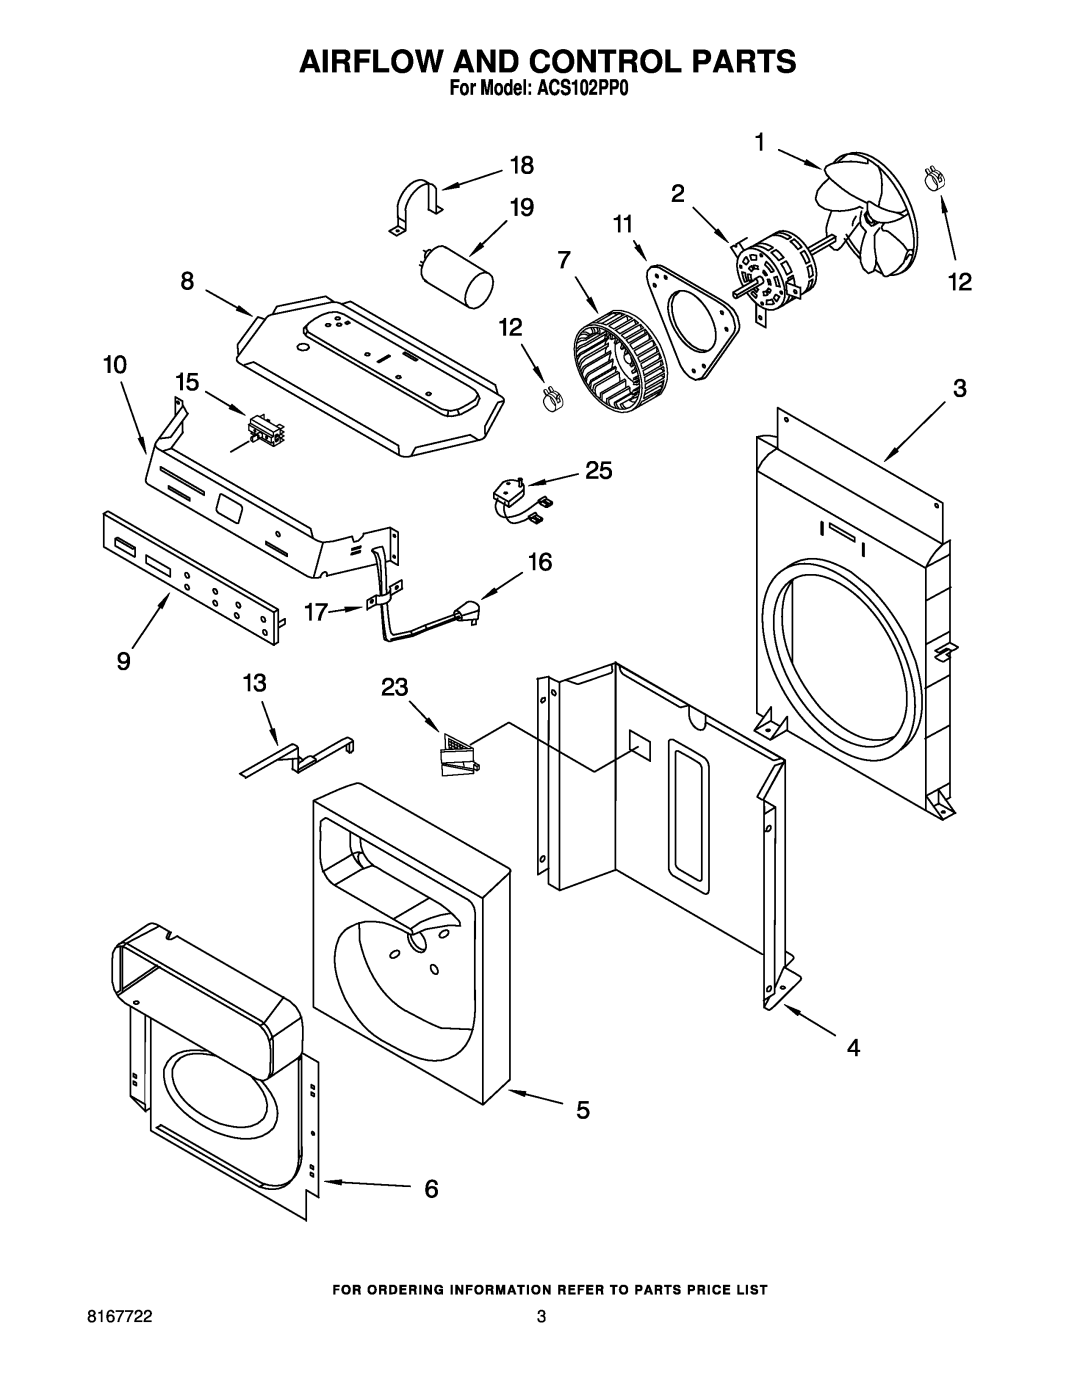 Whirlpool manual Airflow And Control Parts, For Model ACS102PP0 